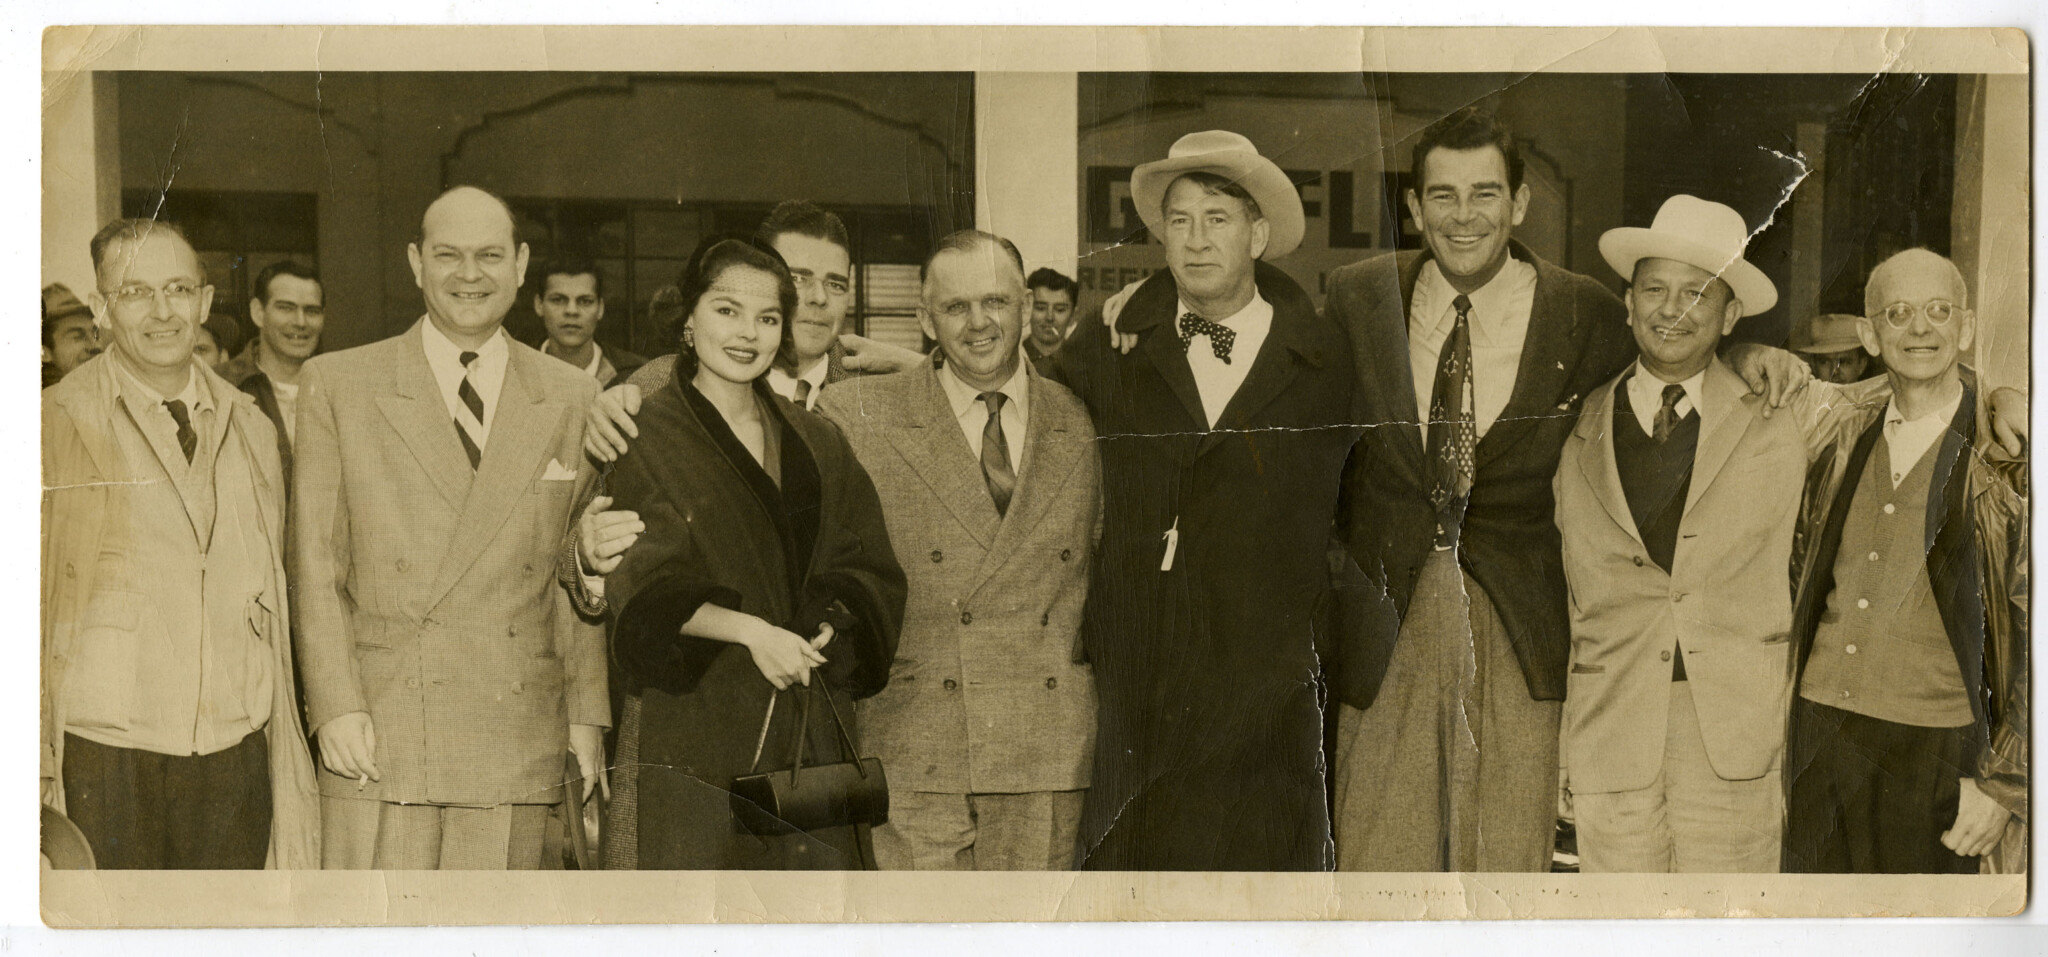 BOB BRYANT AND COMPANY - DATE UNKNOWN: COURTESY OF THE WU PETTUS ARCHIVES - 2024